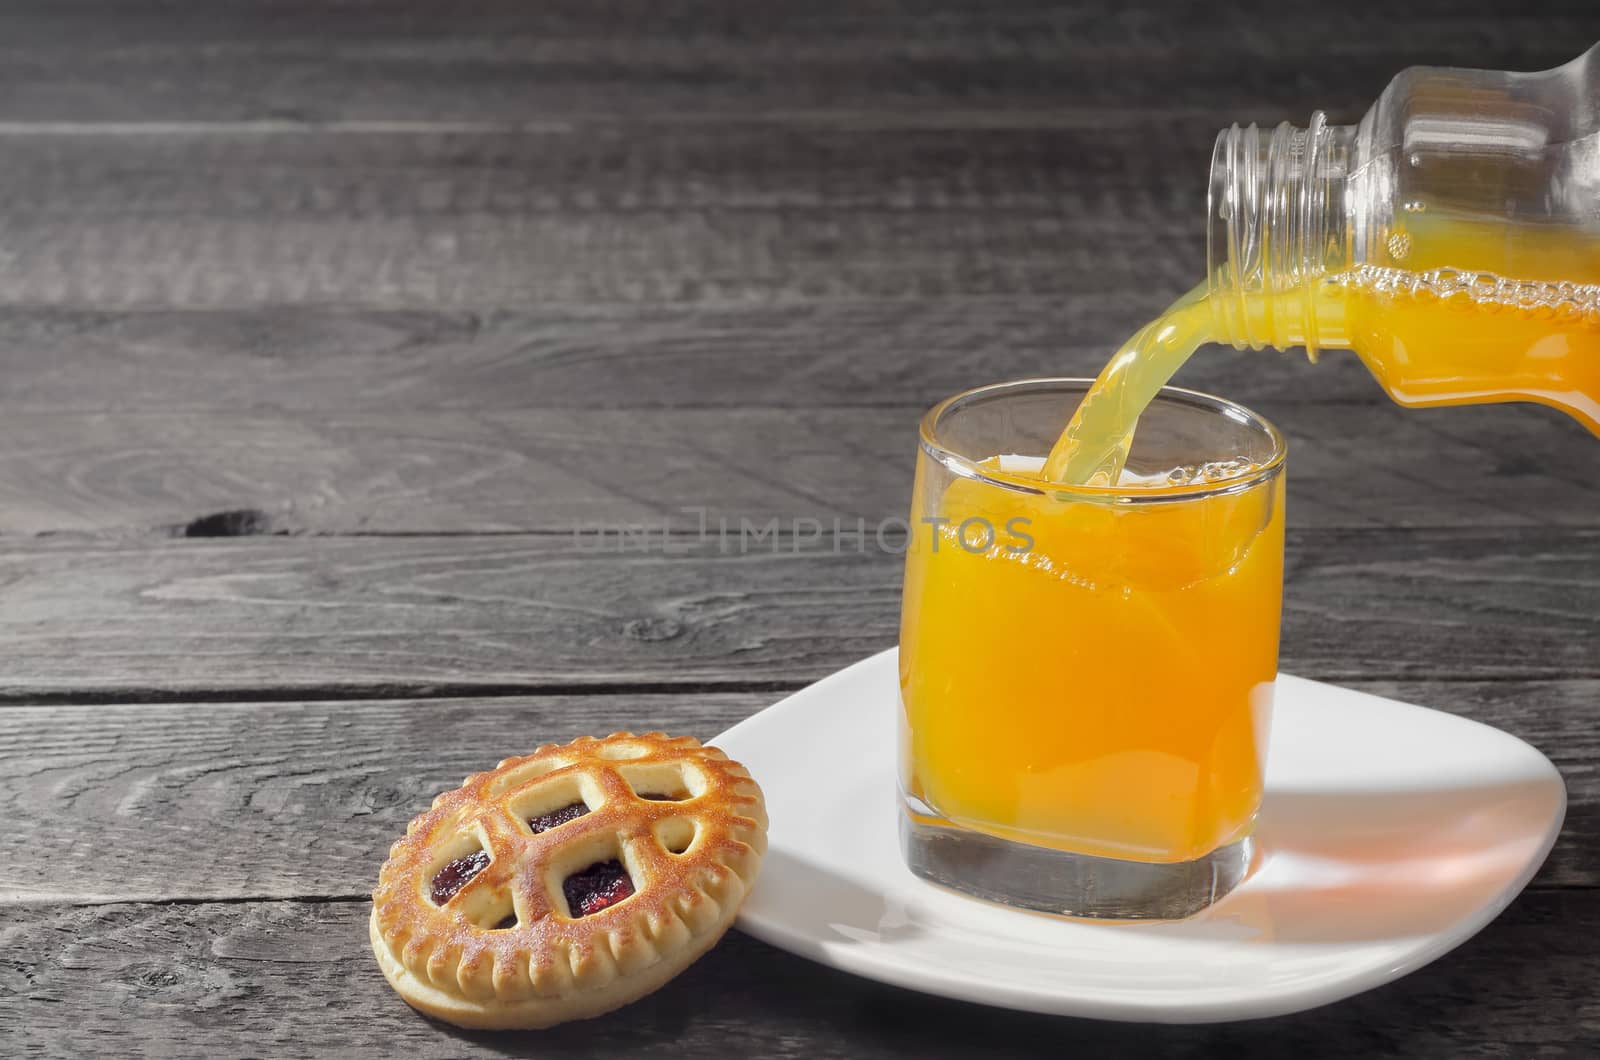 Cookies and orange juice poured from a bottle into a glass on gray wooden background. Selective focus.